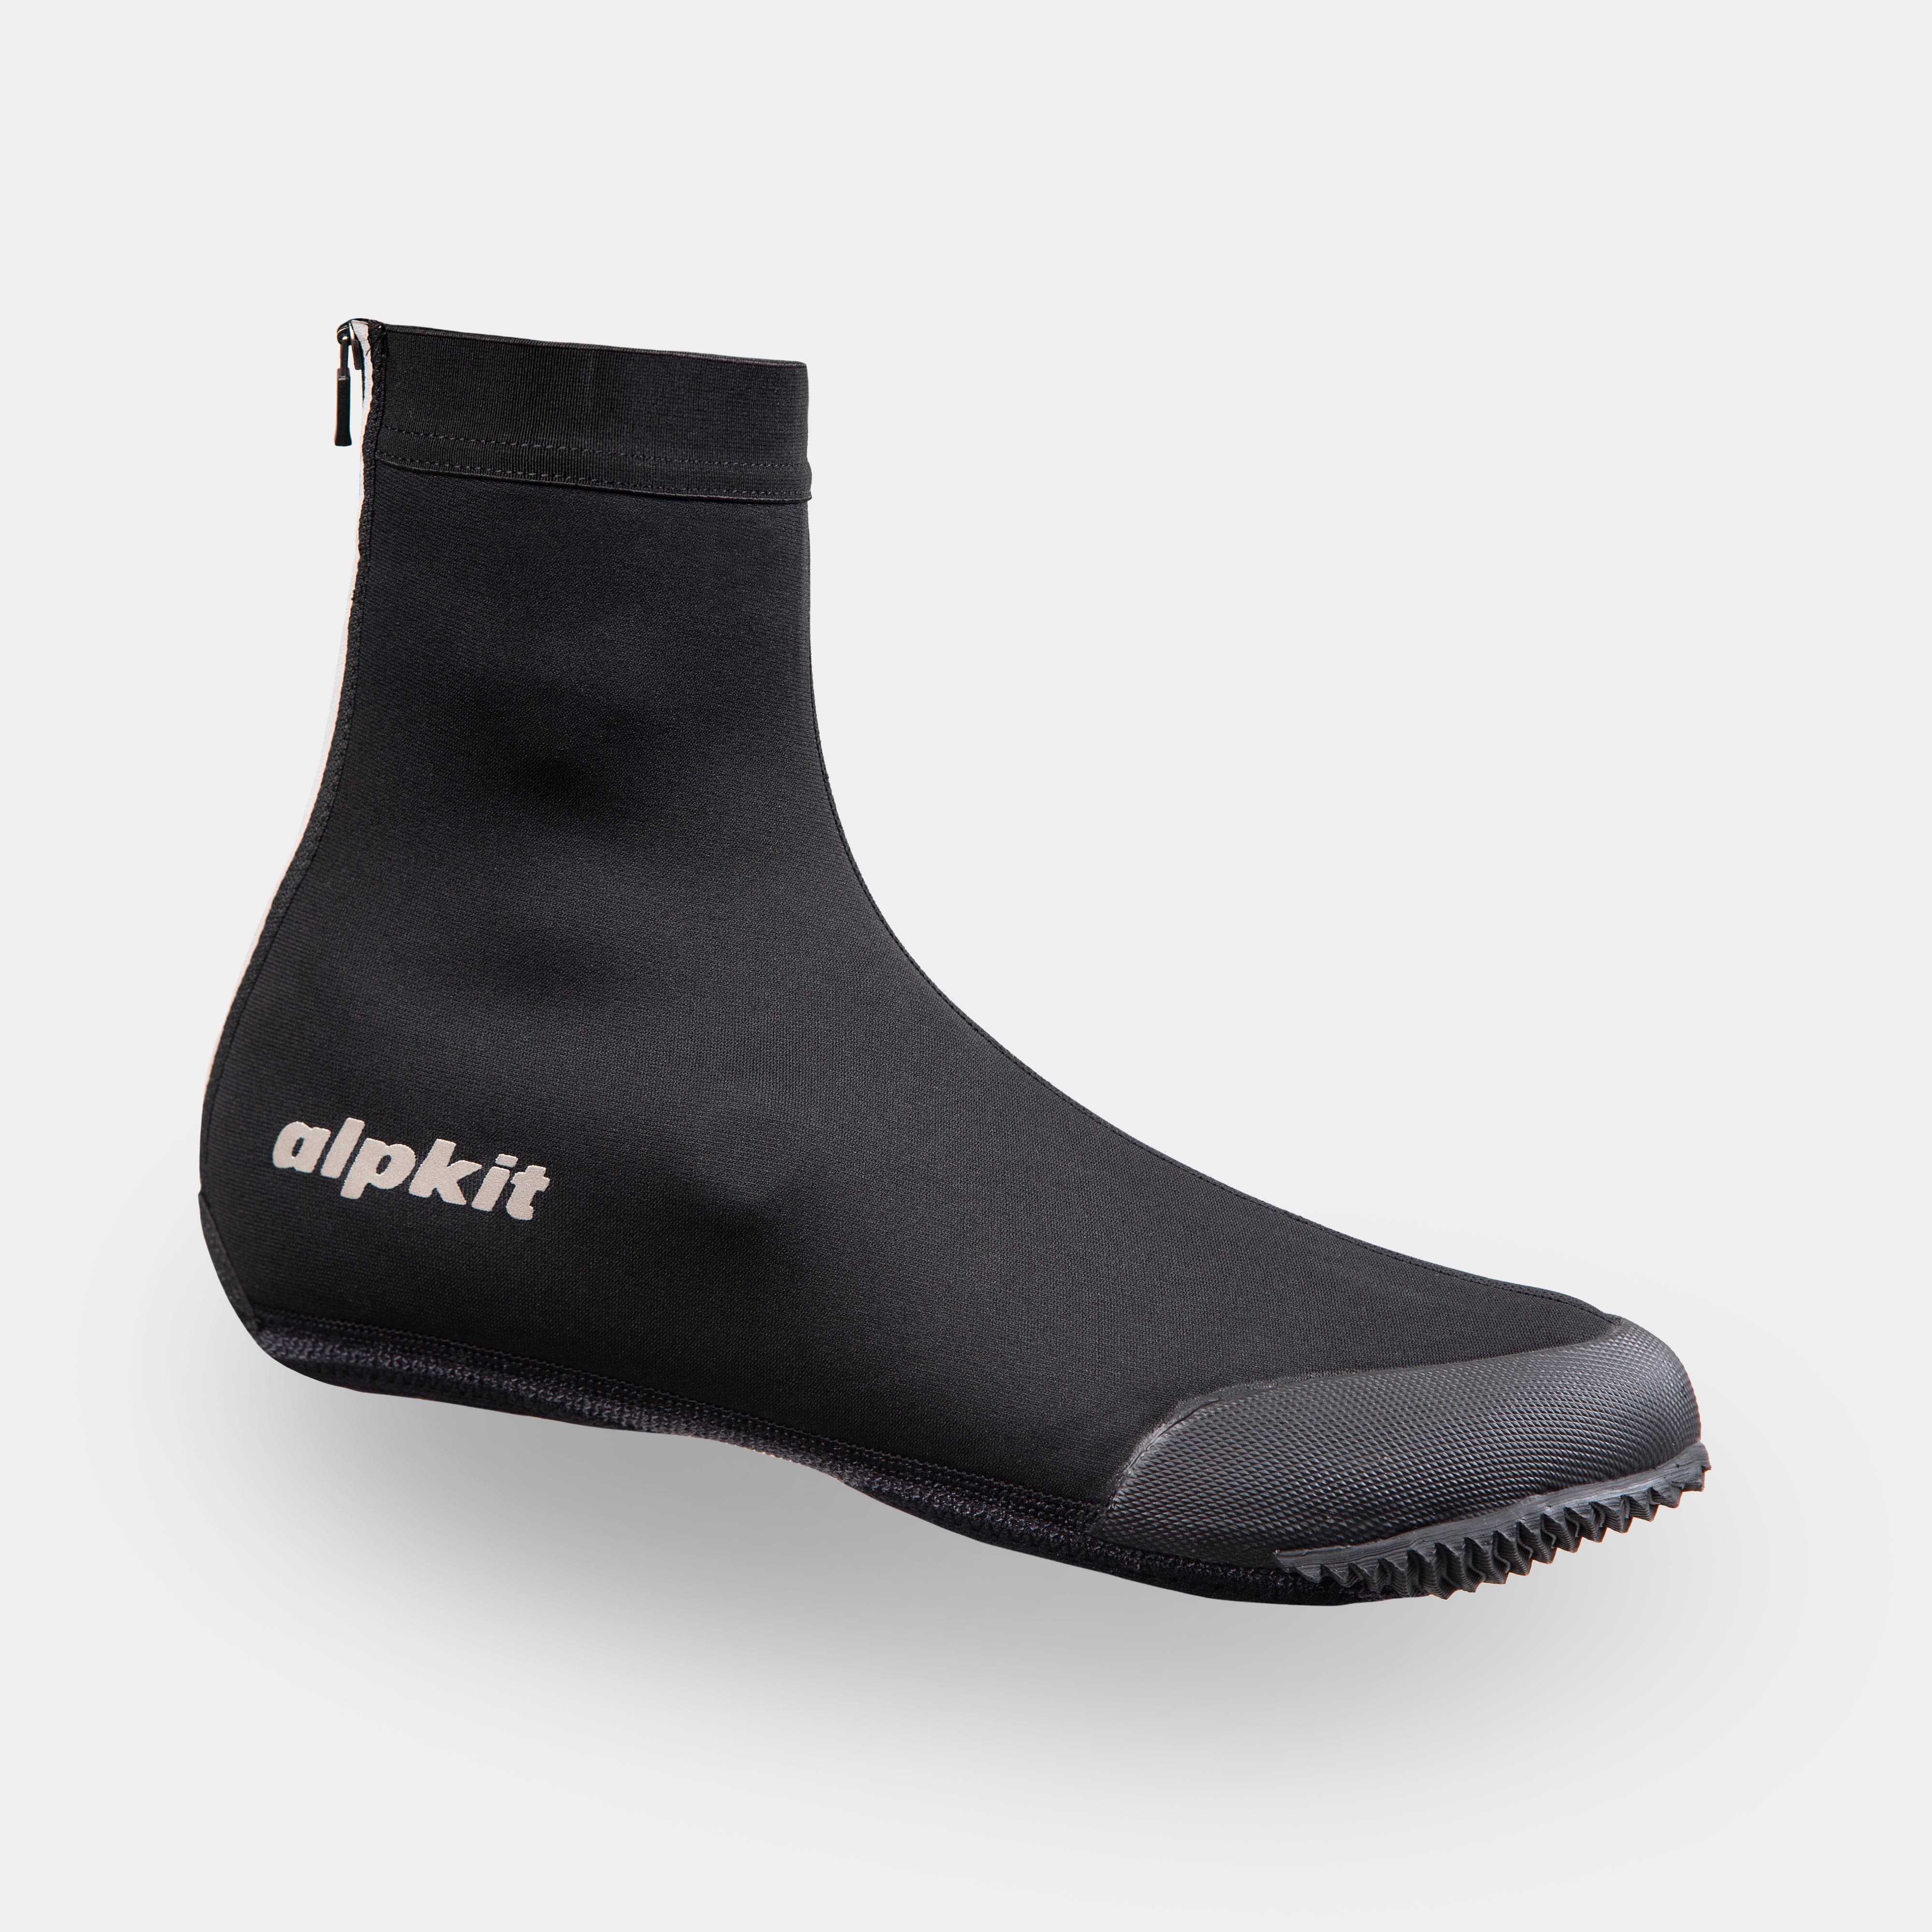 epic cycling overshoes